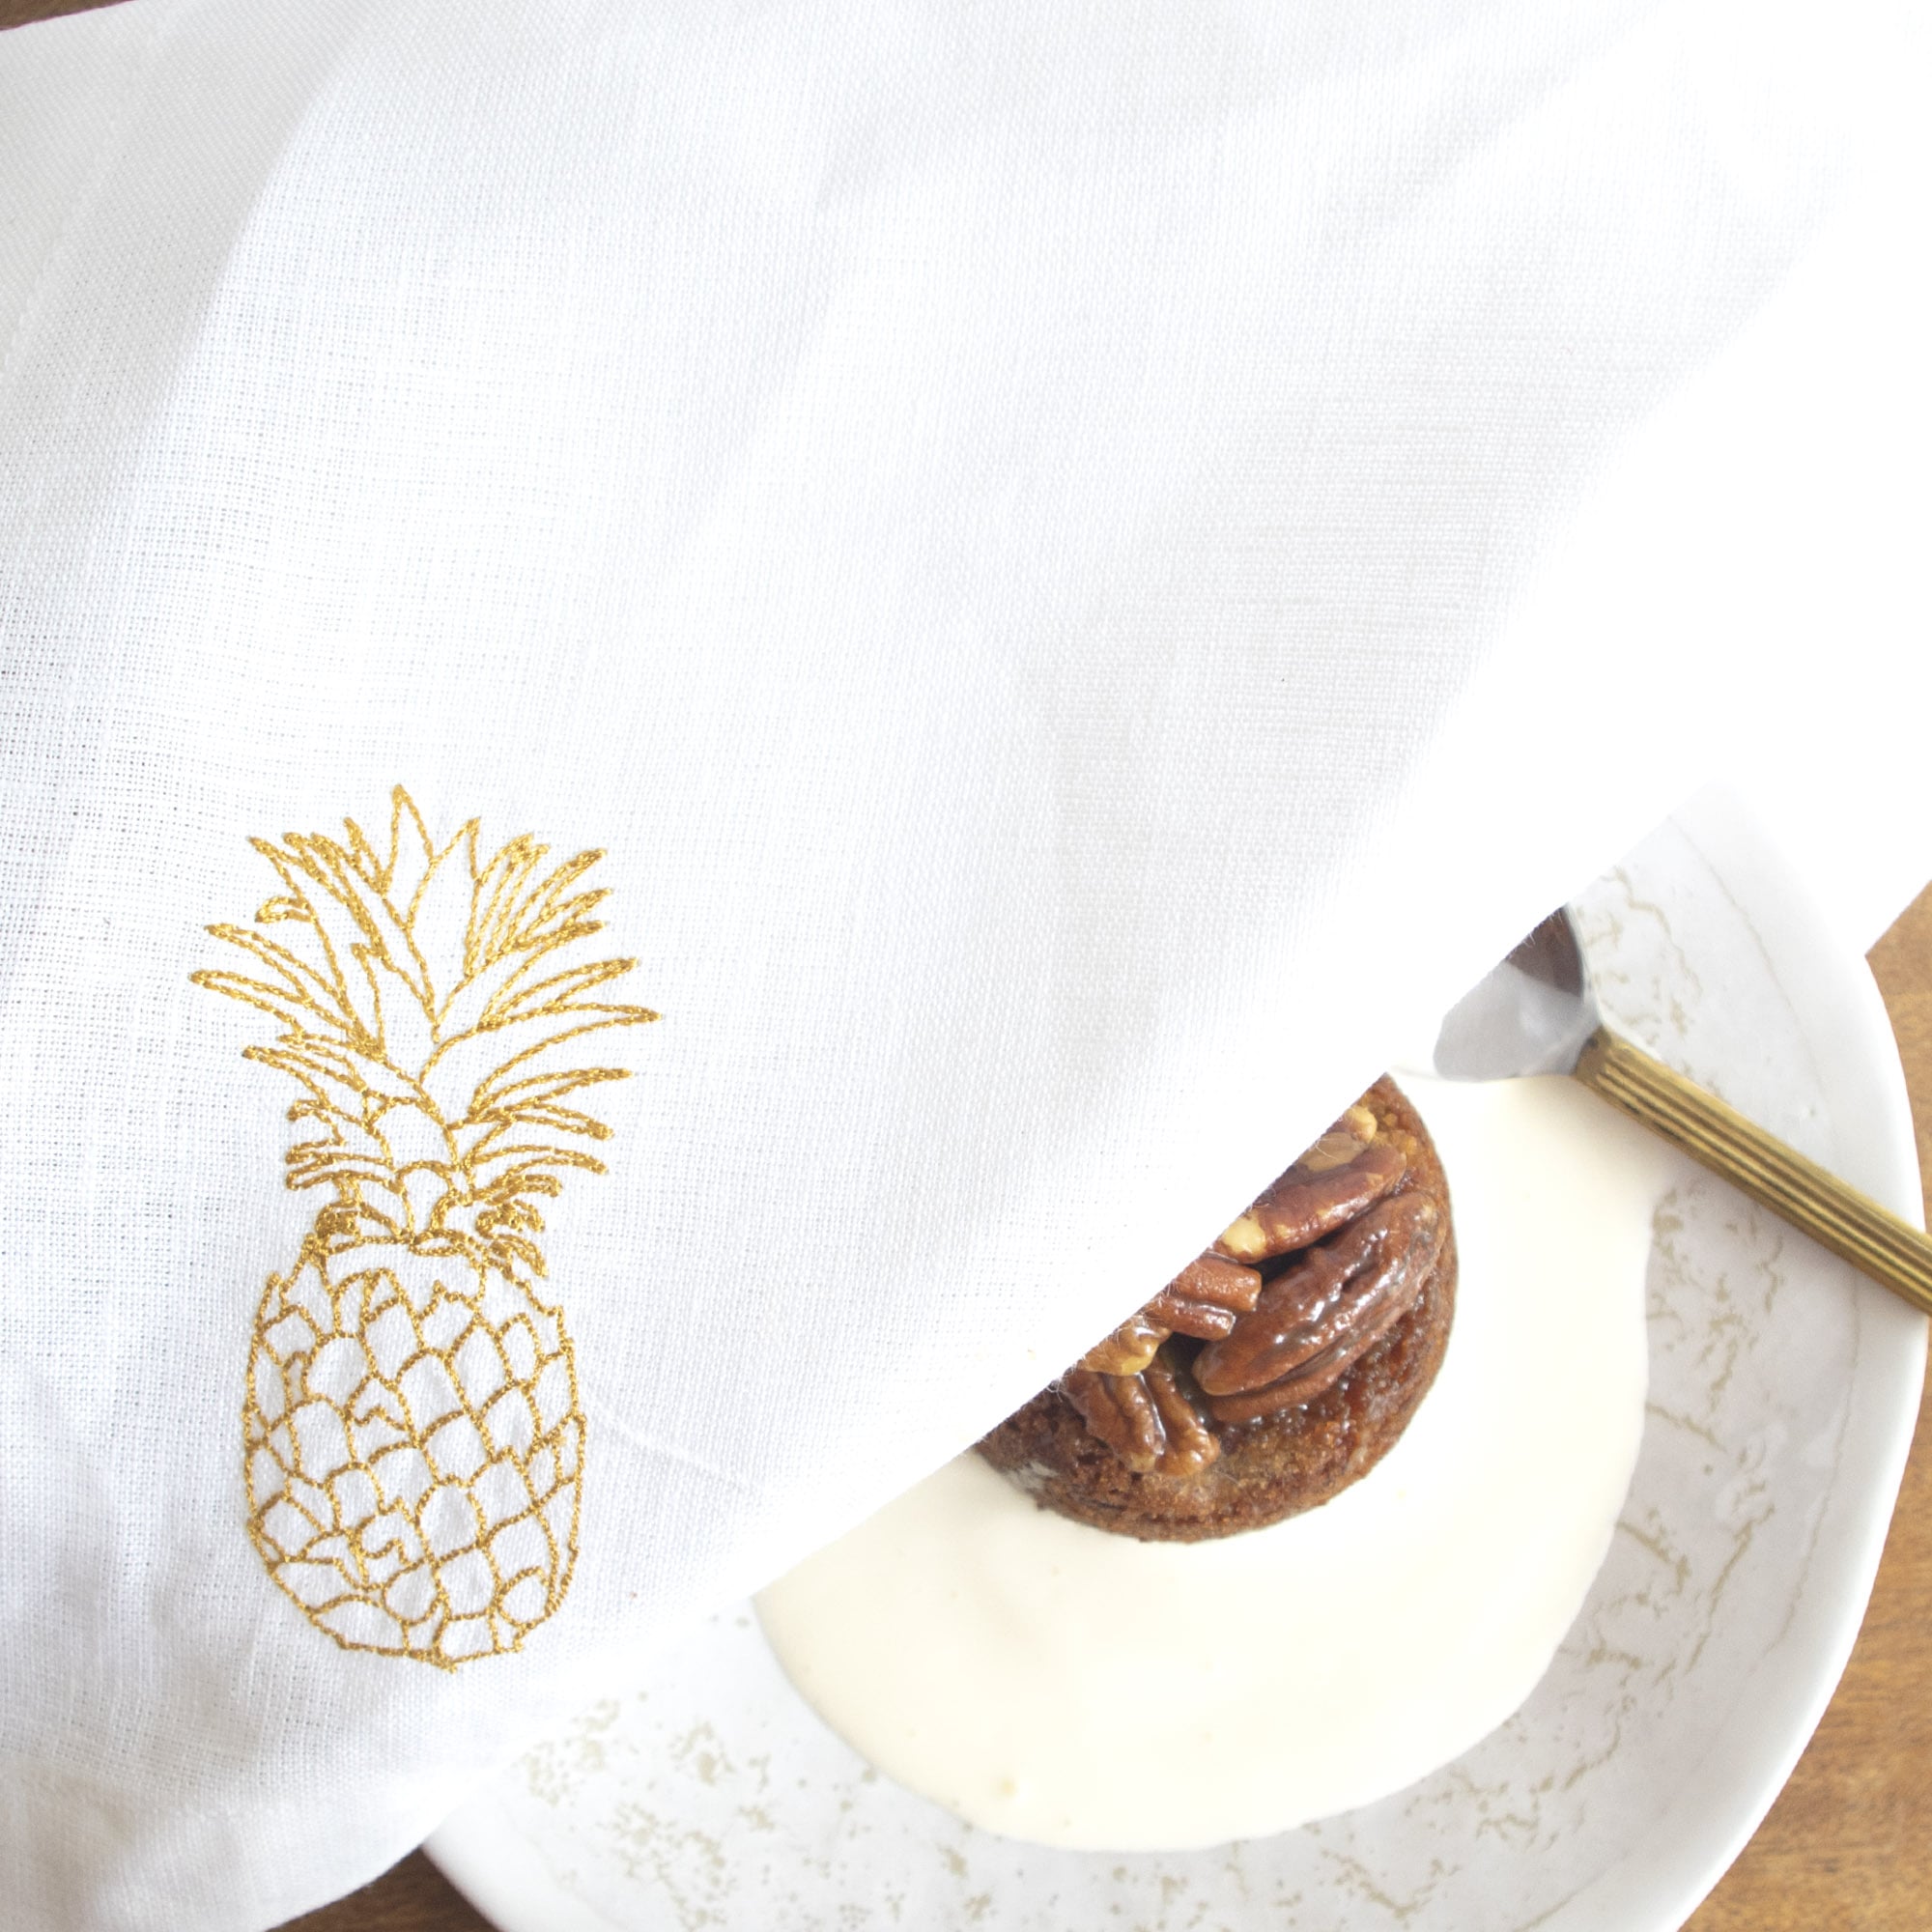 Fine Cell Work Gold Embroidered Pineapple Linen Table Napkins Box Gift Set of 4